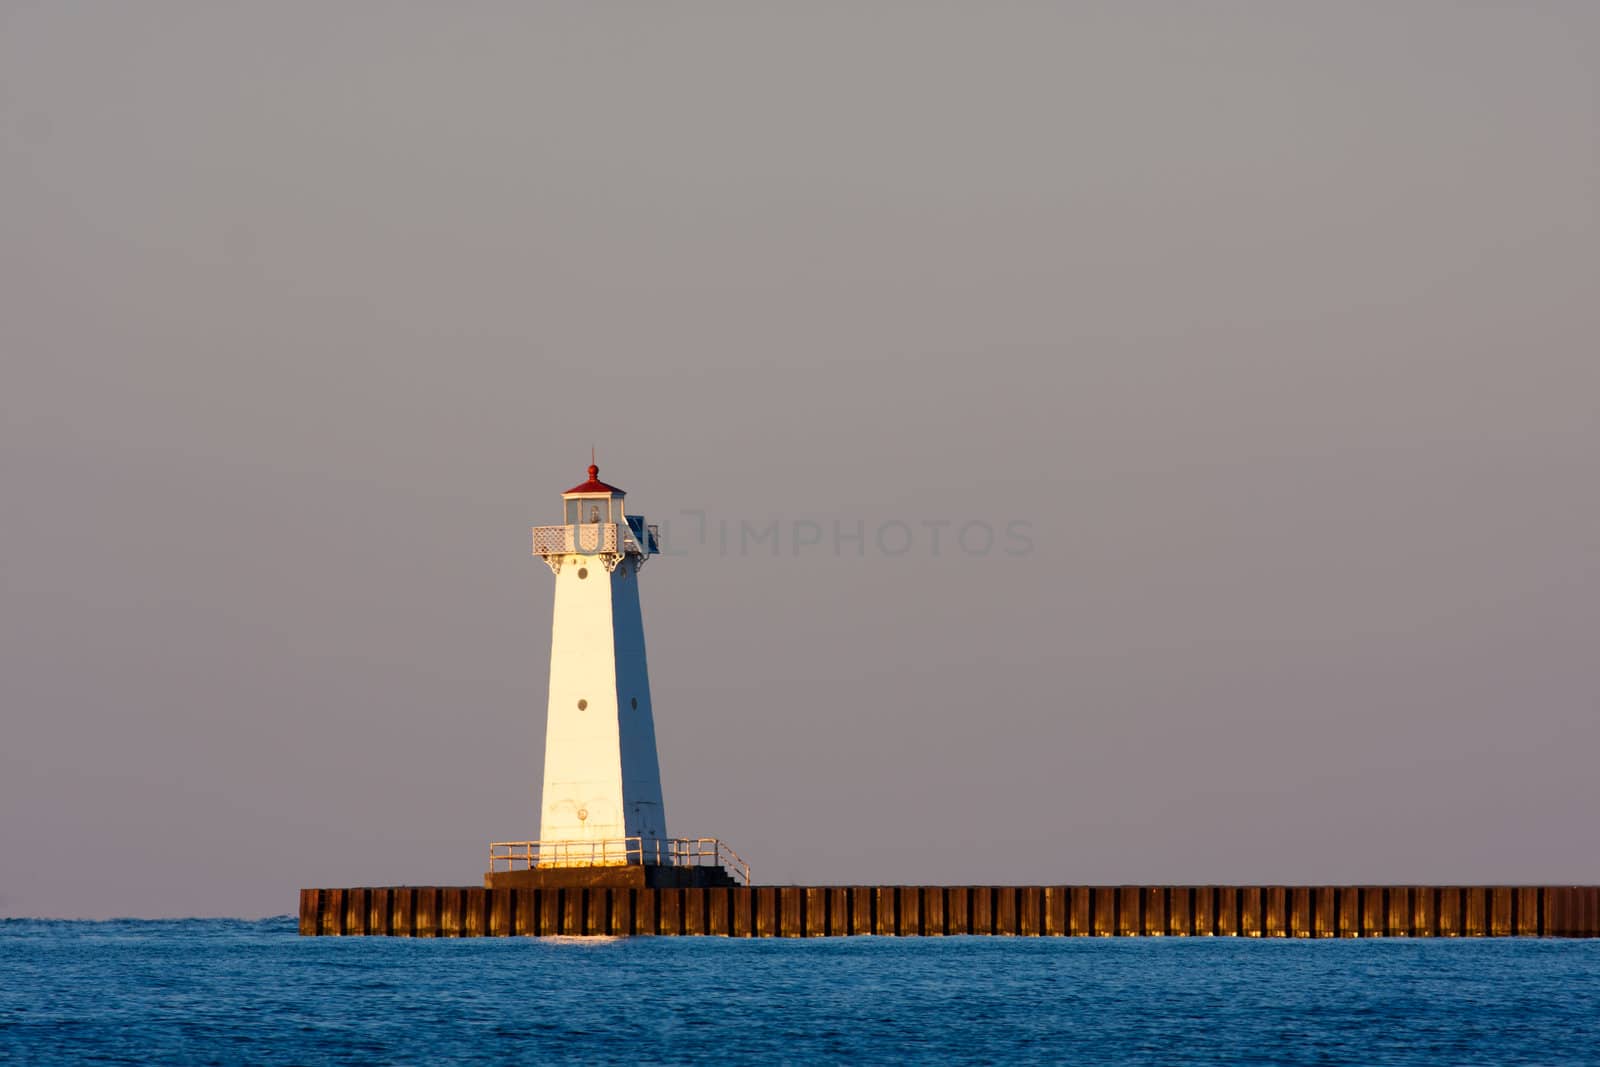 Sodus Bay Lighthouse on Lake Ontario in evening light at sunset